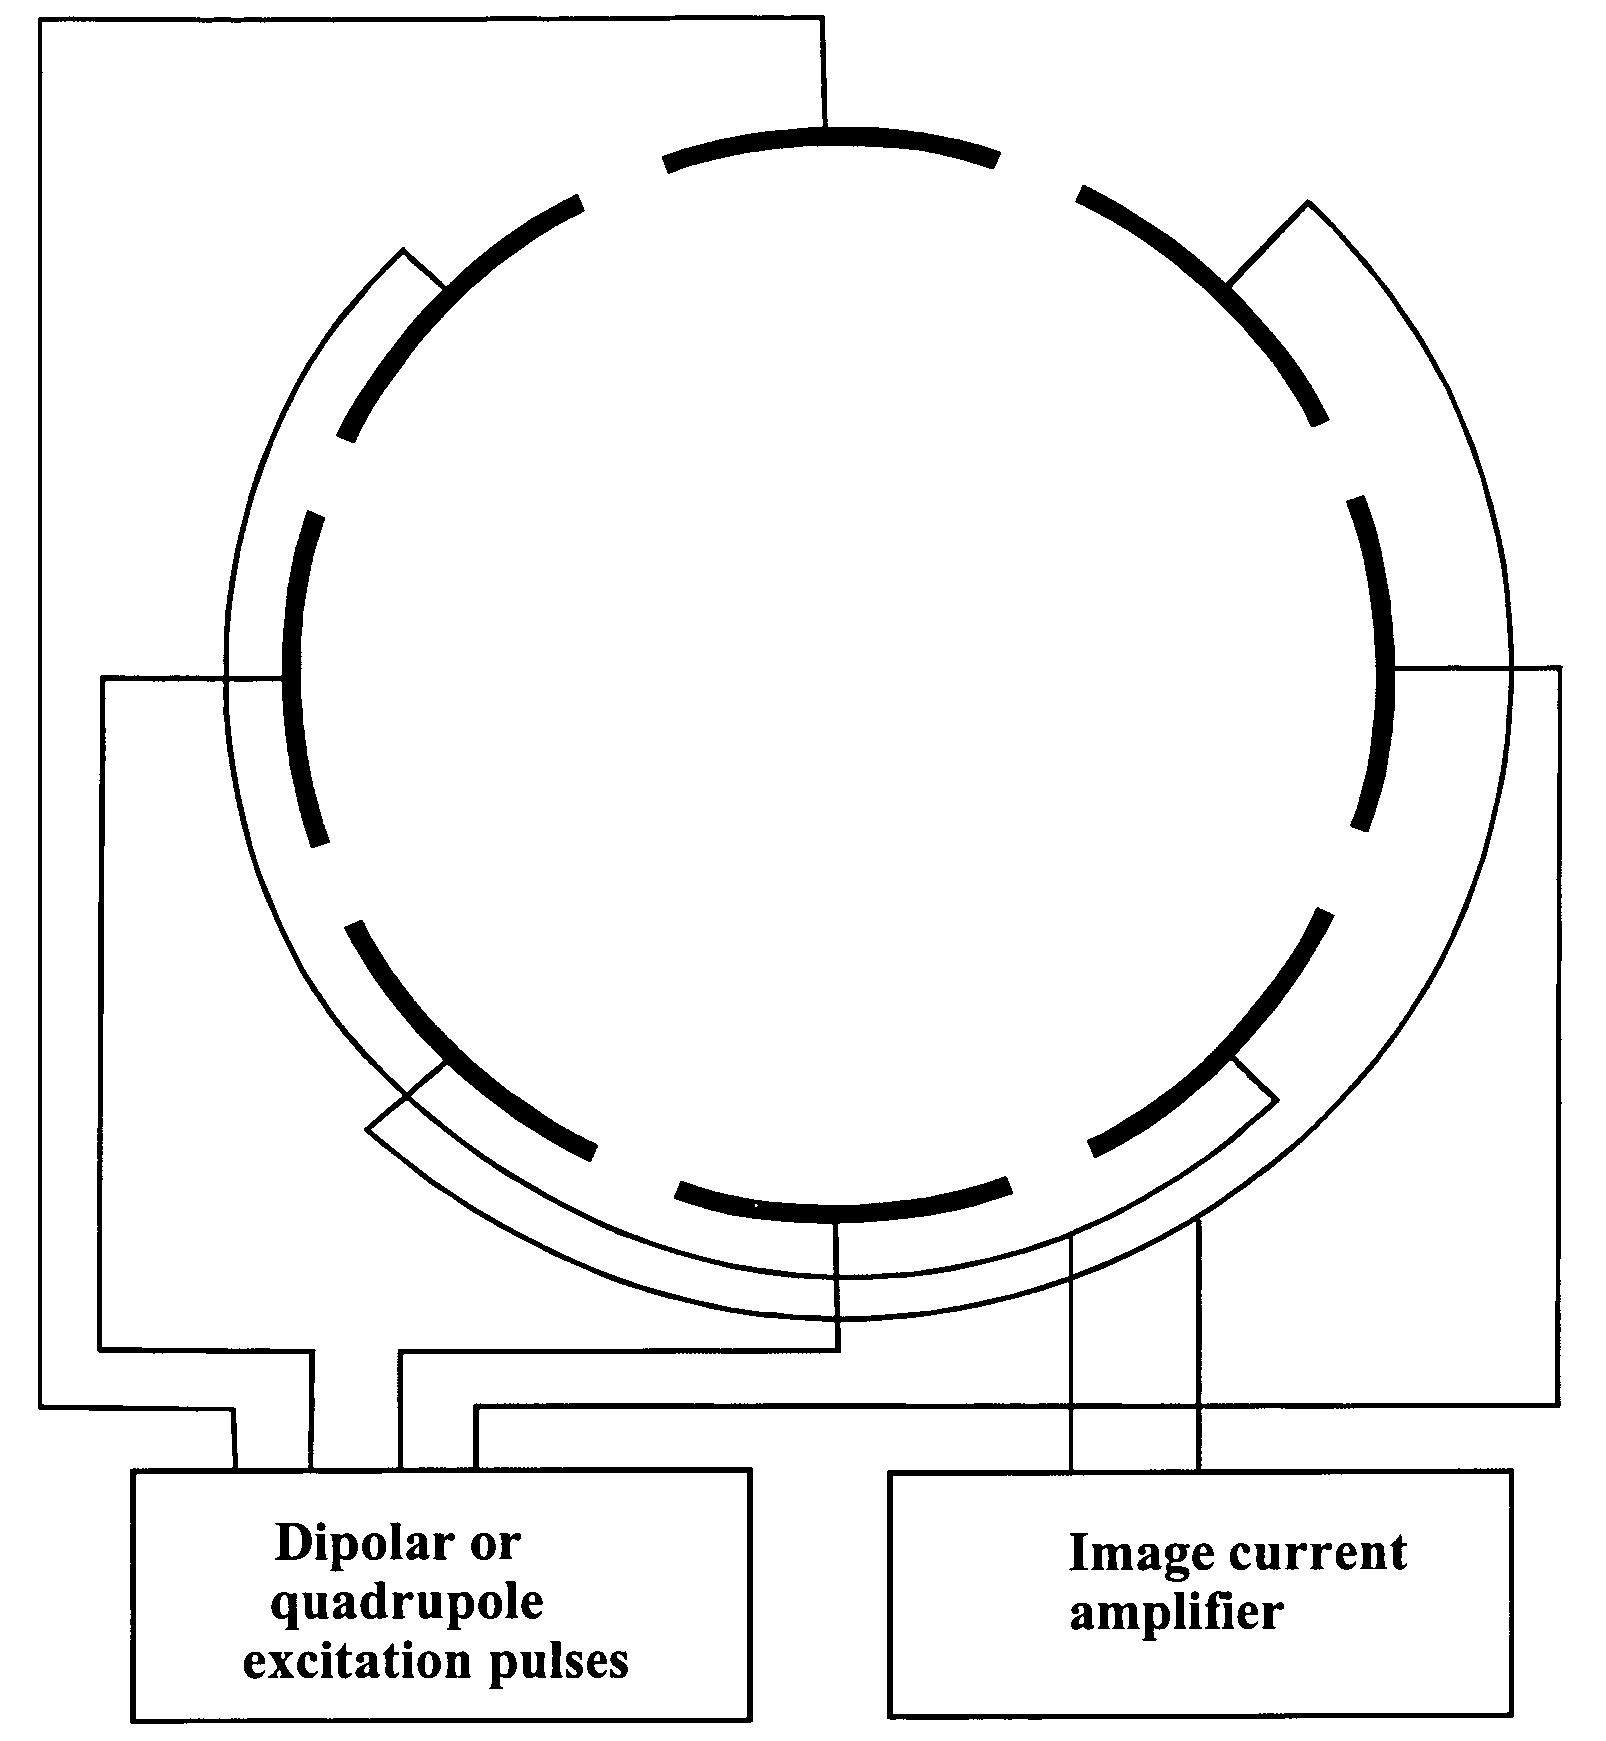 Measuring methods for ion cyclotron resonance mass spectrometers